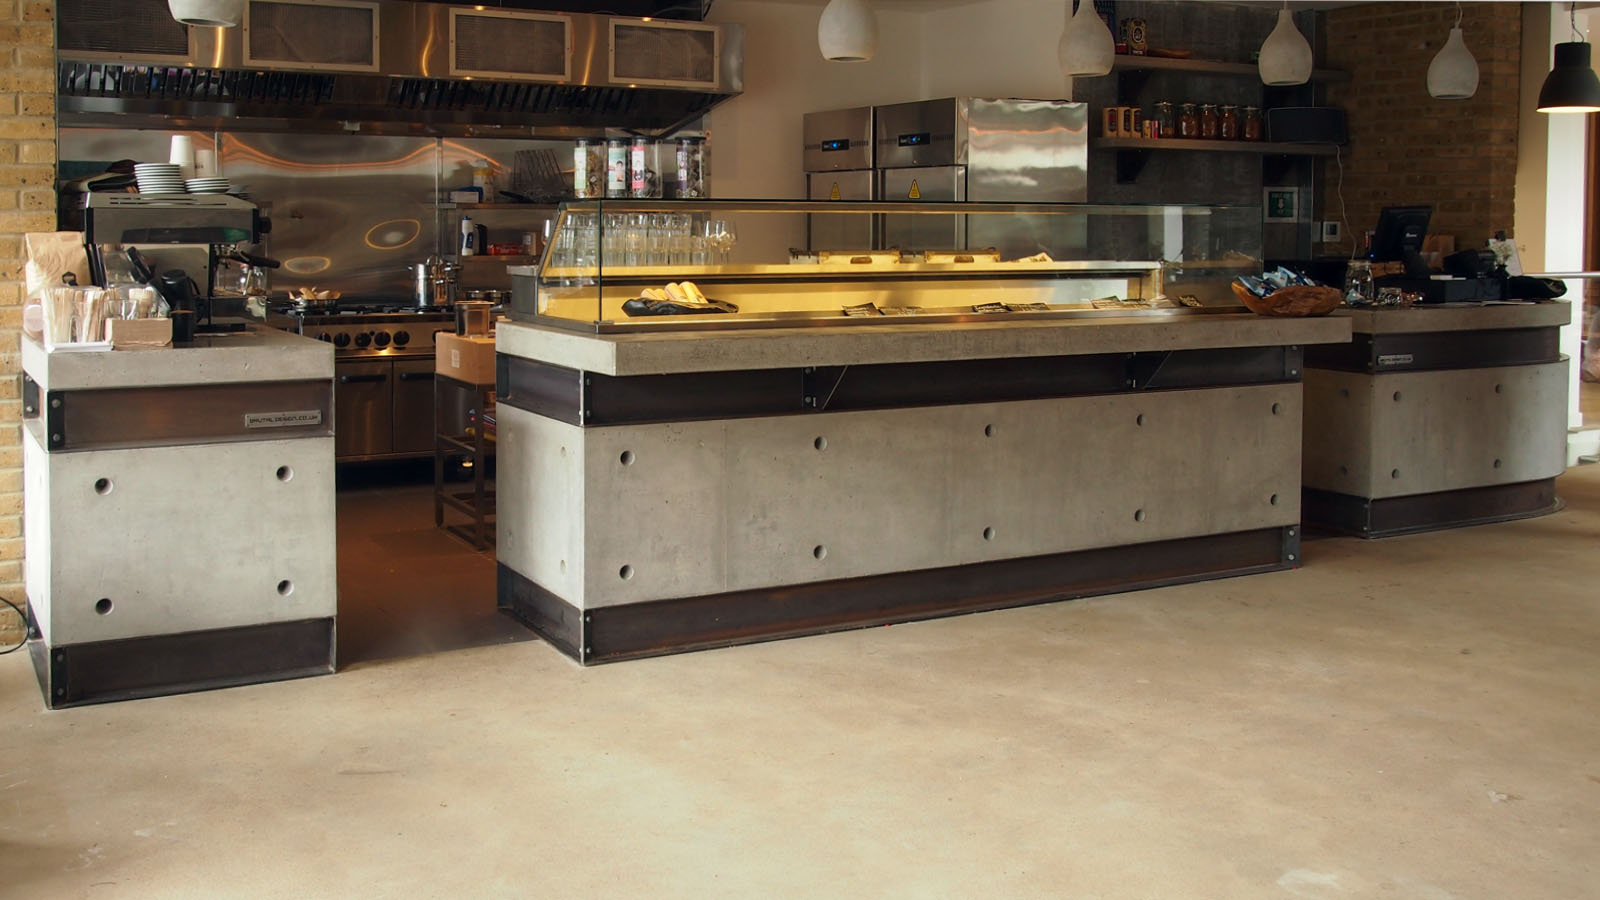 Polished Concrete worktops and countertop installations at The Lodge.Space